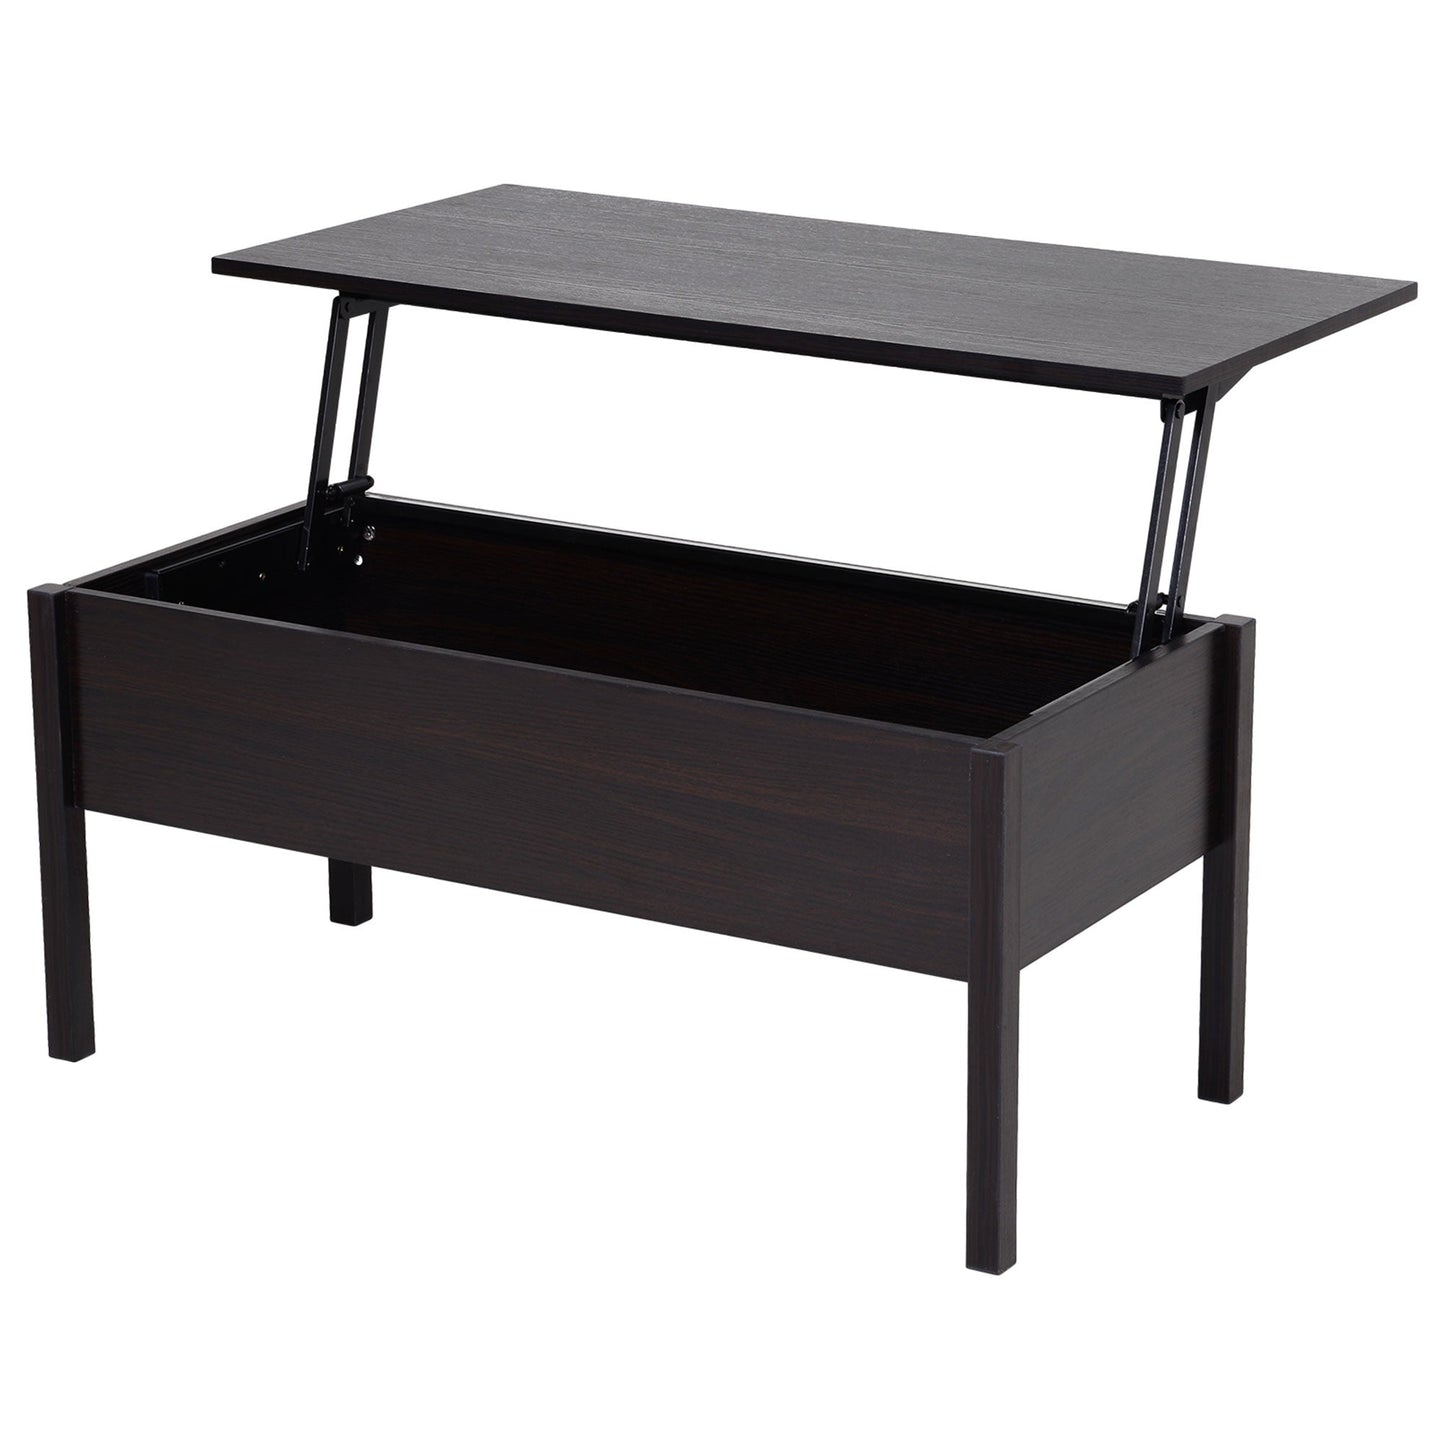 39" Modern Lift Top Coffee Table with Hidden Storage Compartment, Center Table for Living Room, Coffee at Gallery Canada